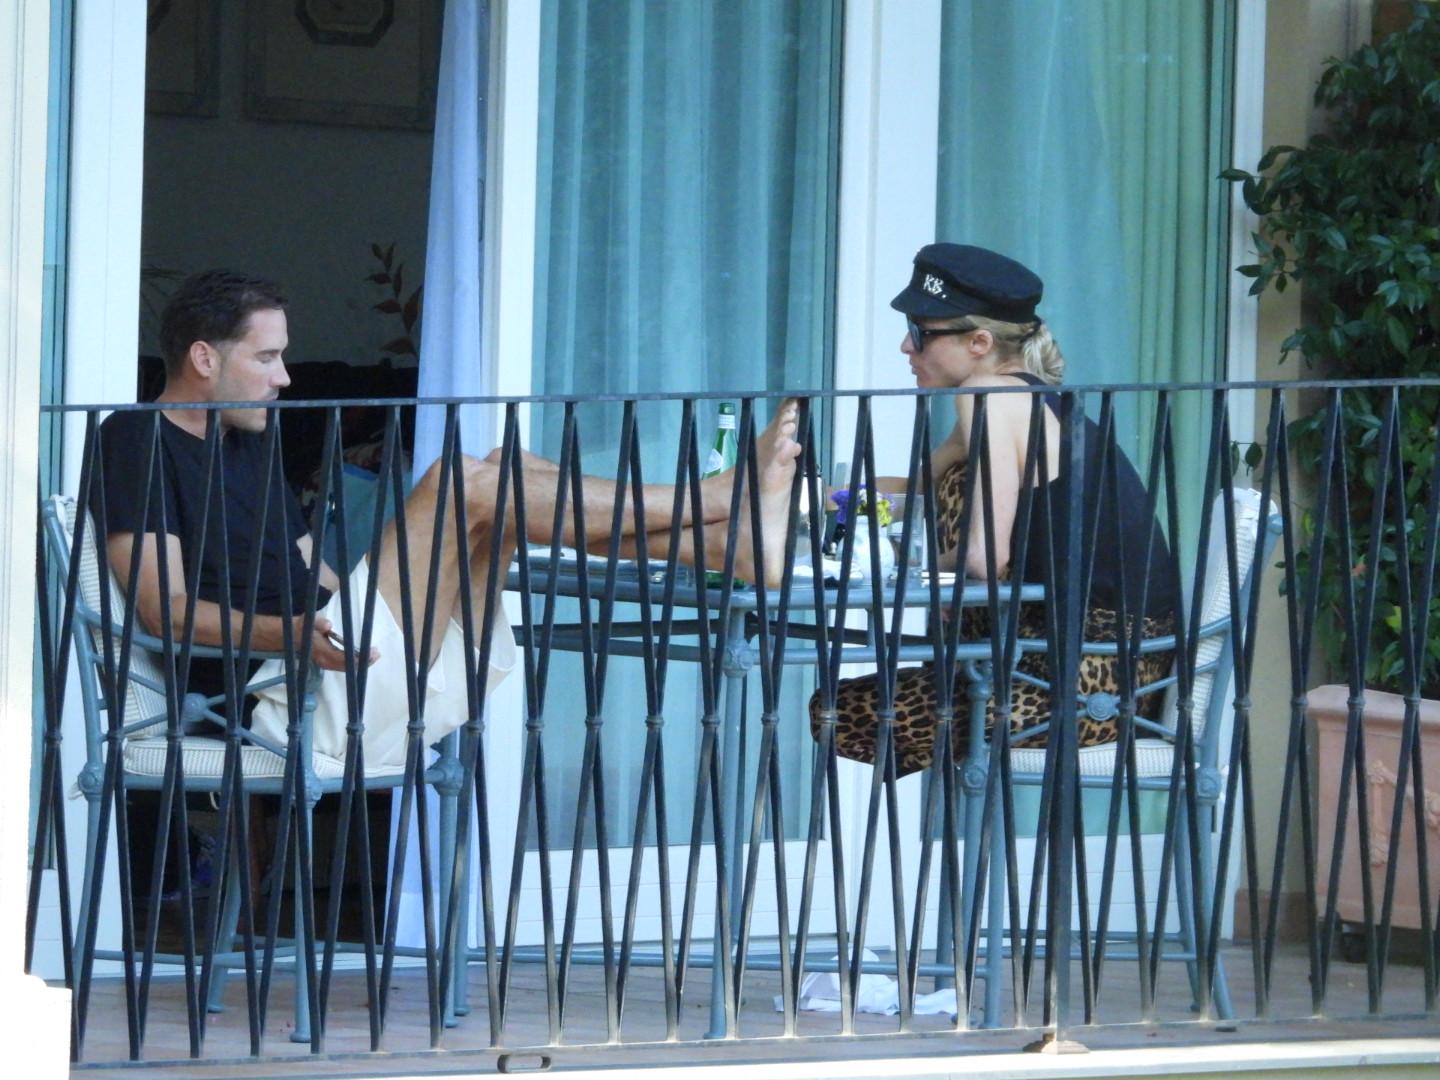 Paris Hilton and husband Carter Reum are seen relaxing on the terrace of their hotel in Portofino